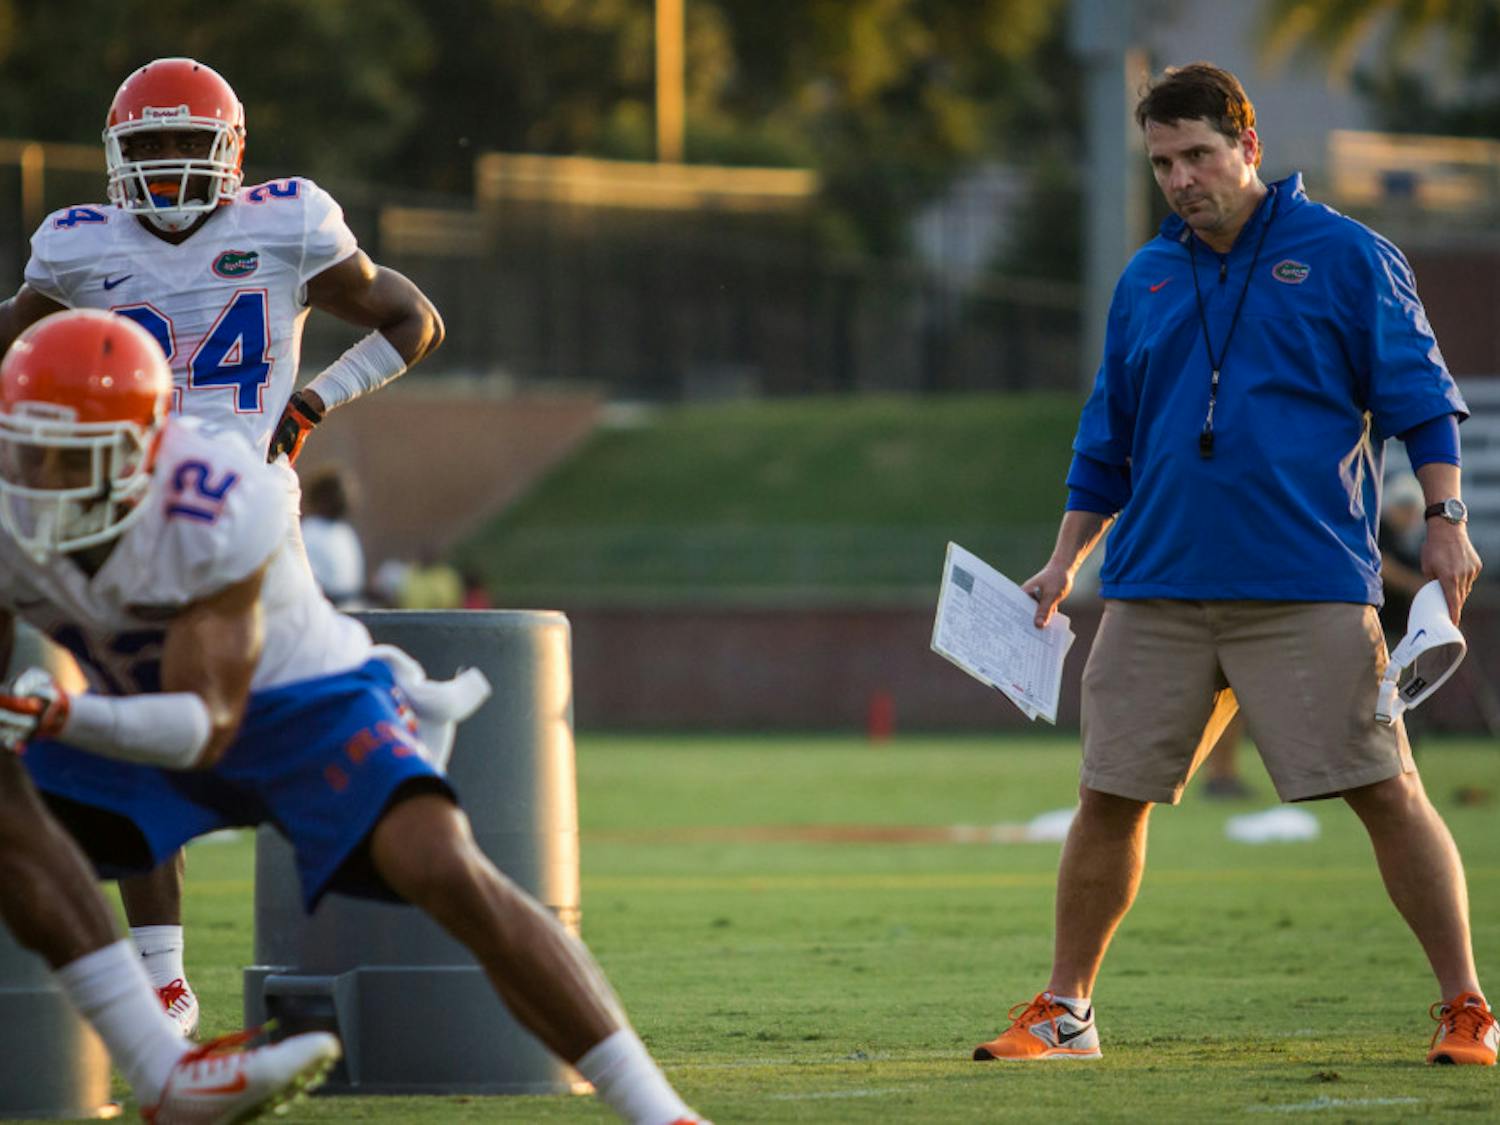 Will Muschamp looks on during practice on Aug. 9 at Donald R. Dizney Stadium. Muschamp, entering his fourth year as head coach, faces a tough schedule including road games against Alabama and Florida State.